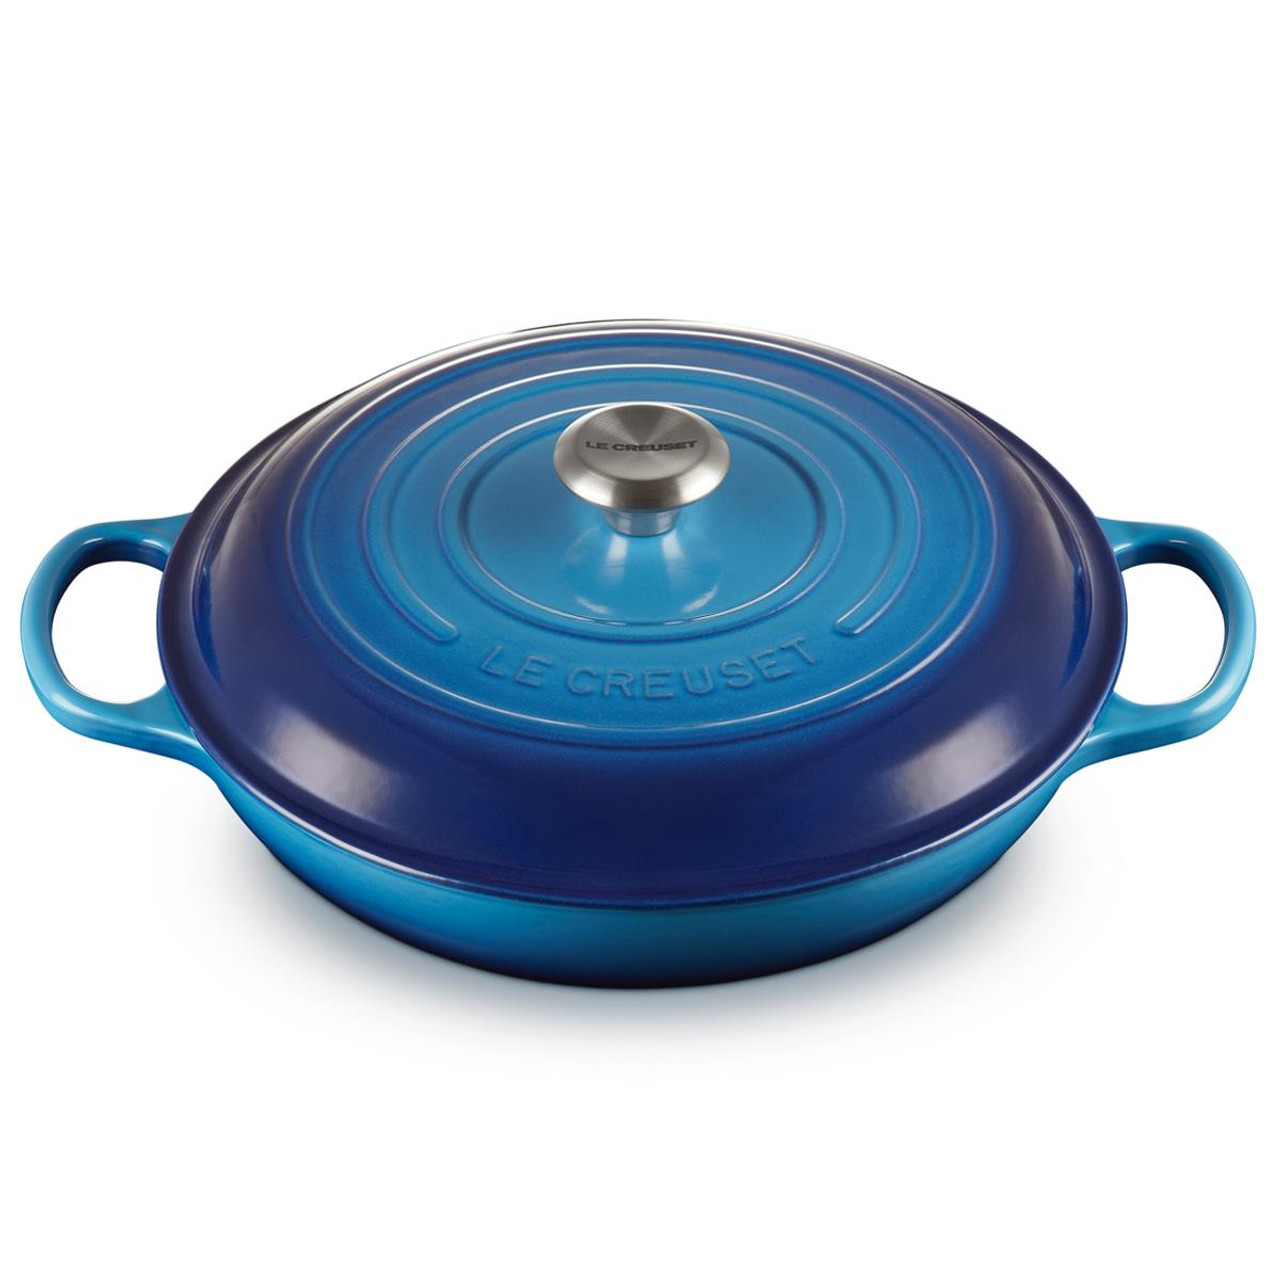 What is the purpose of the Le Creuset shallow casserole dish?